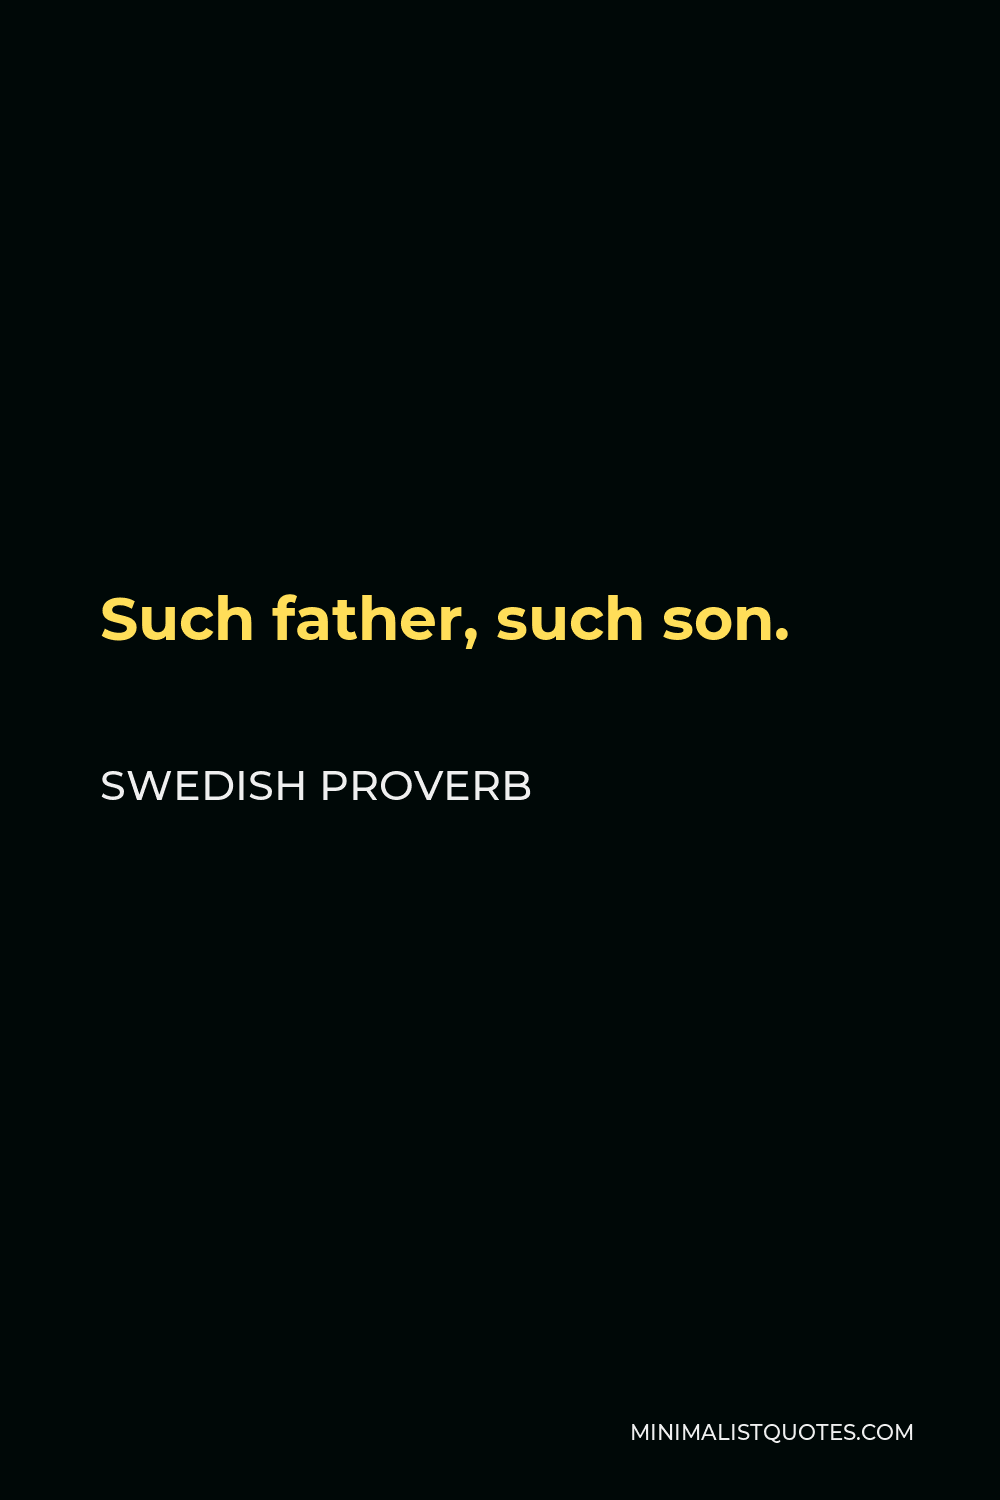 Swedish Proverb Quote - Such father, such son.